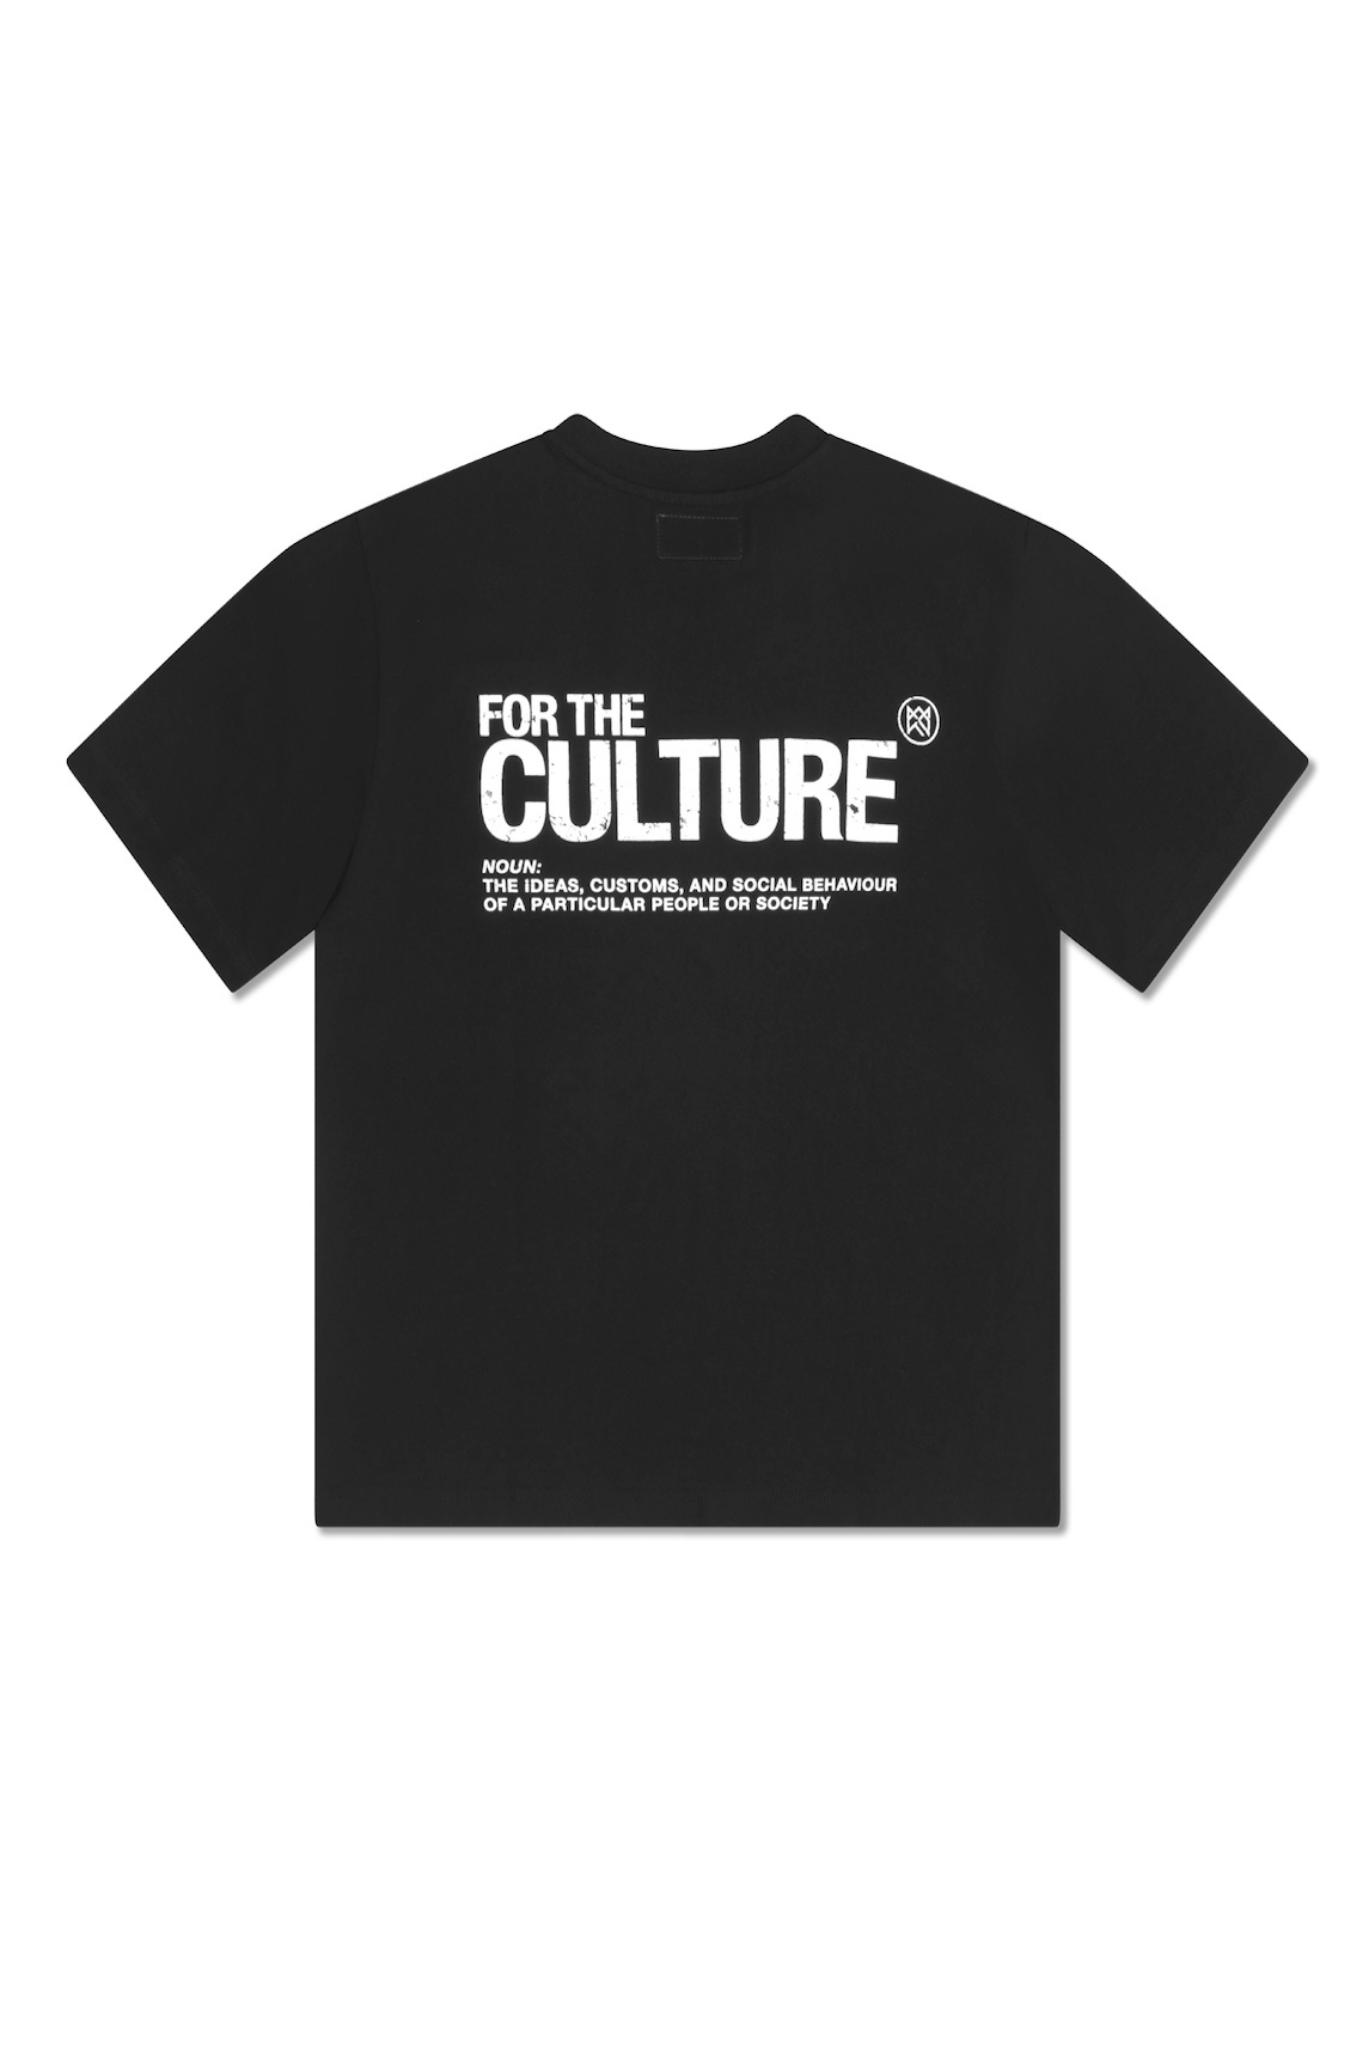 For The Culture Crown Tee Black - Real Artistic People